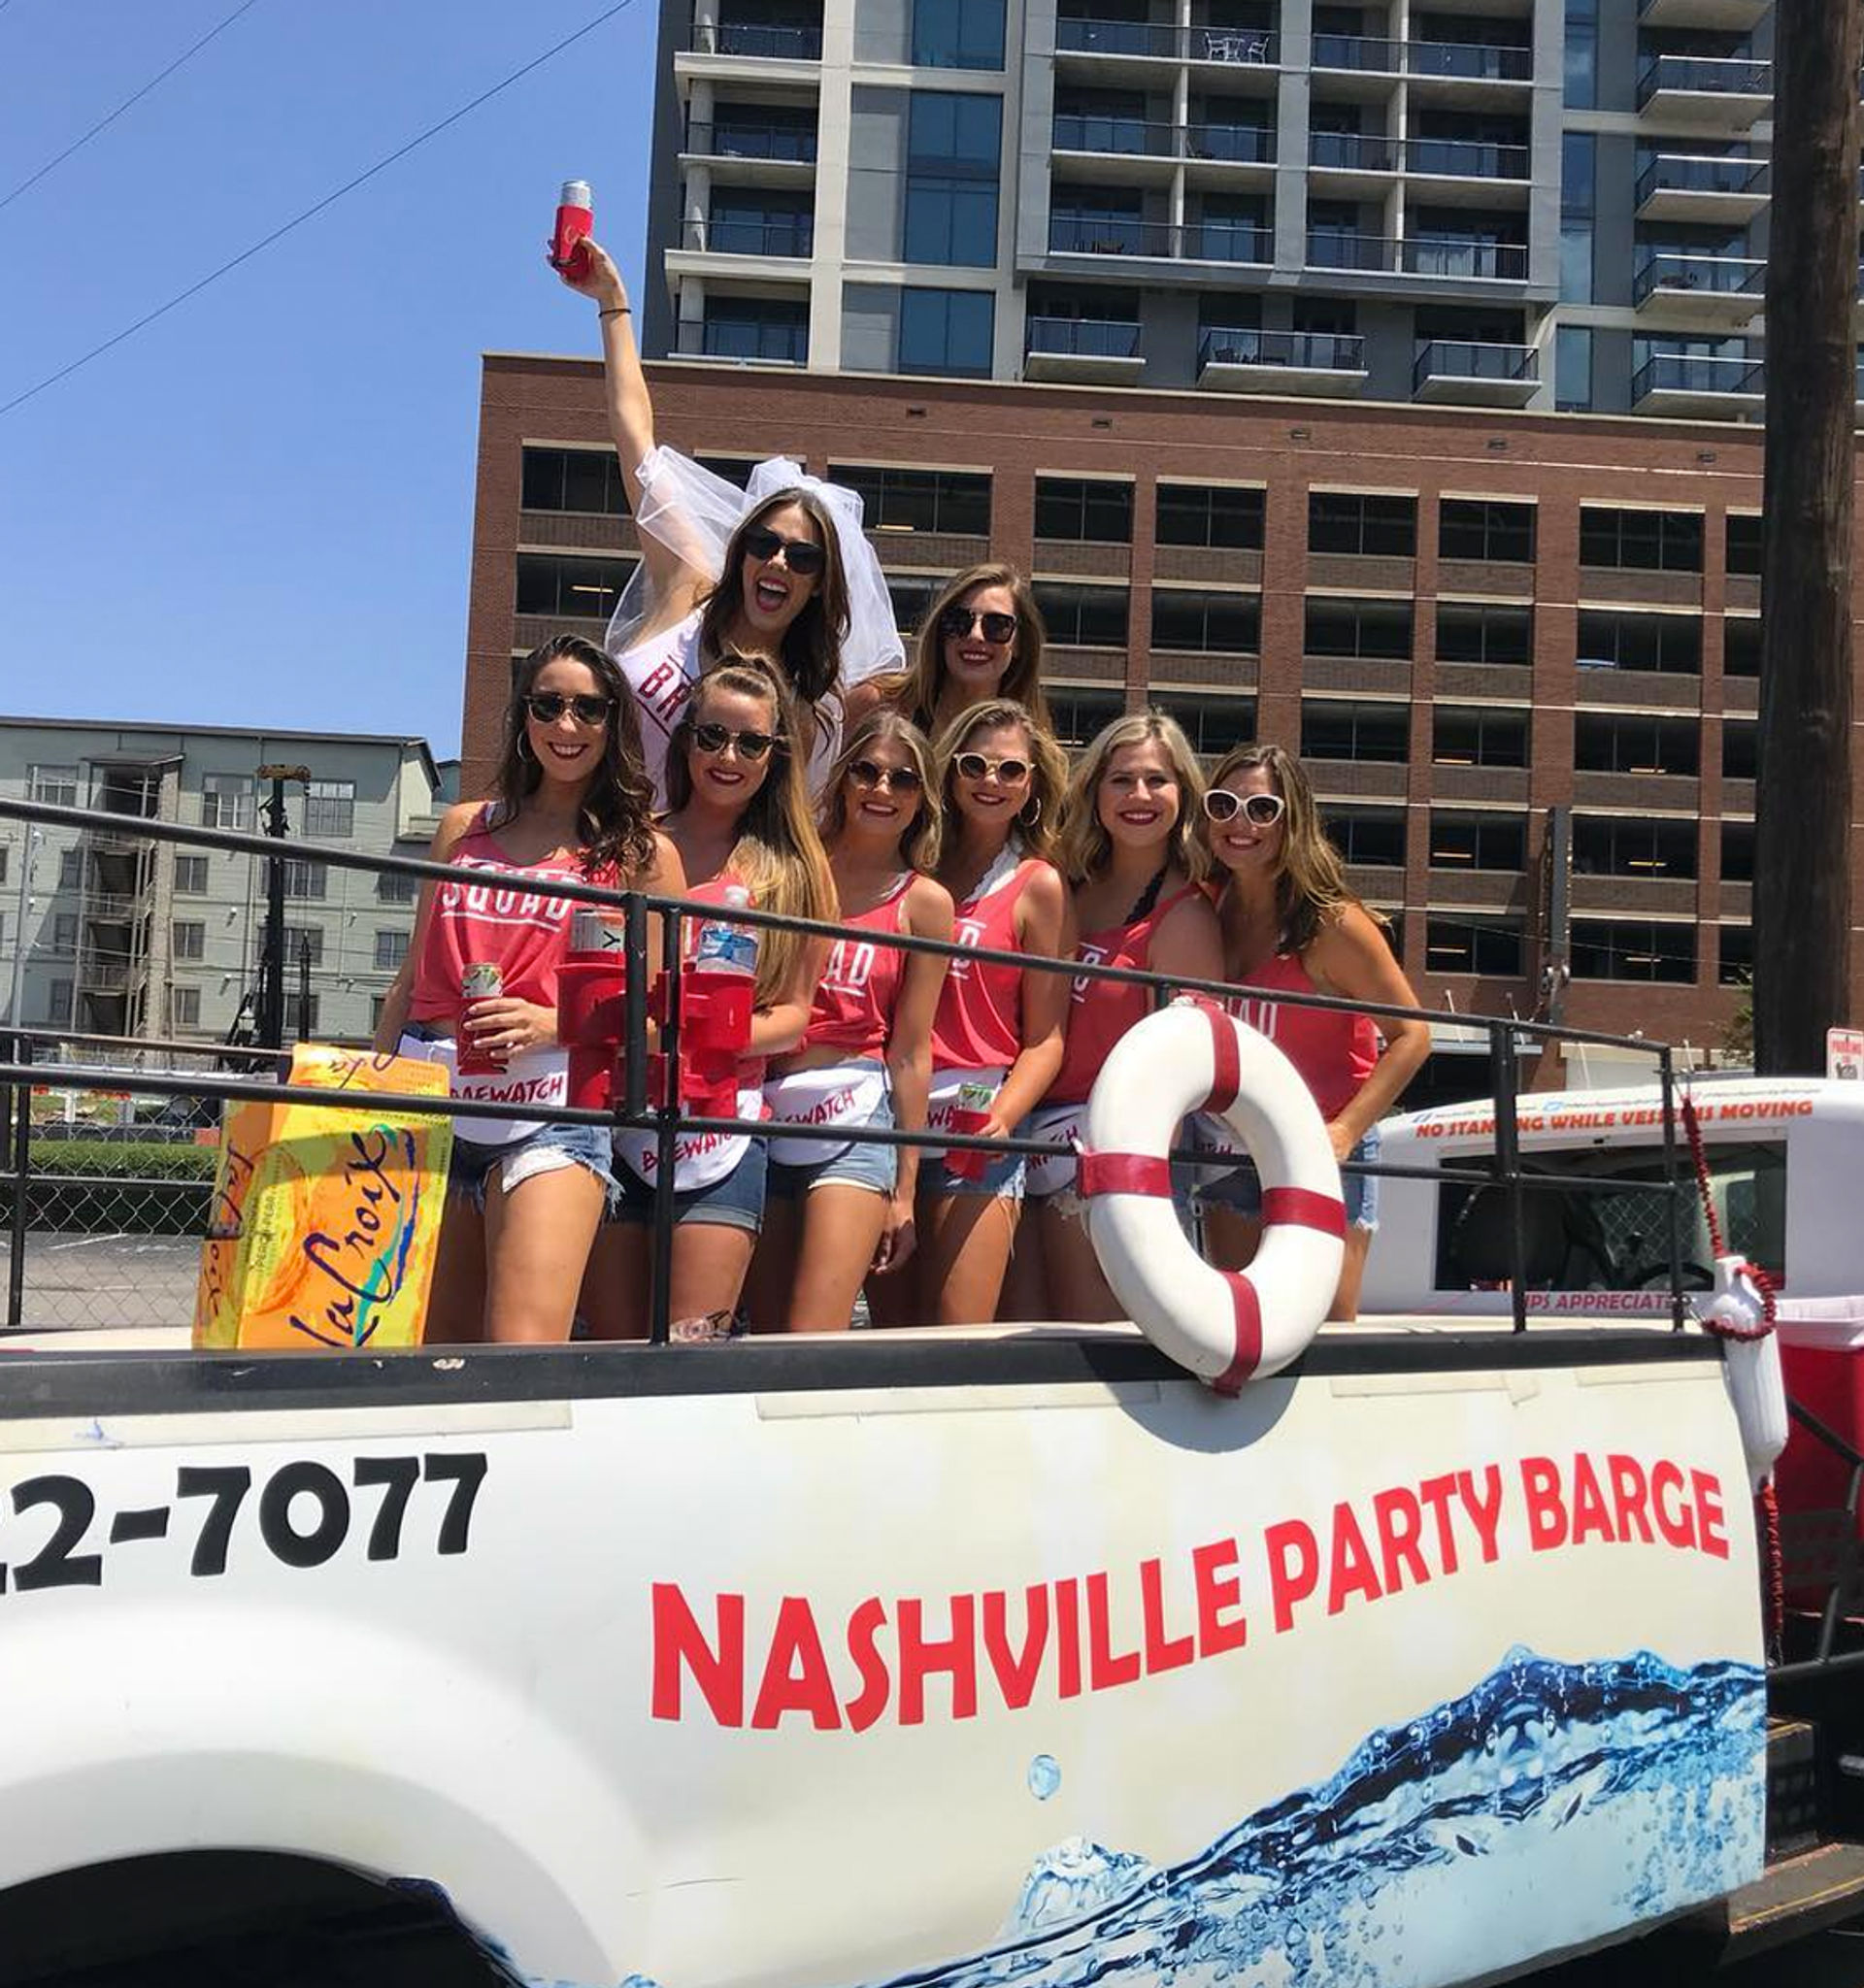 Nashville Party Barge: Non-Stop Beats, Booze & Party Vibes on Wheels (BYOB) image 3